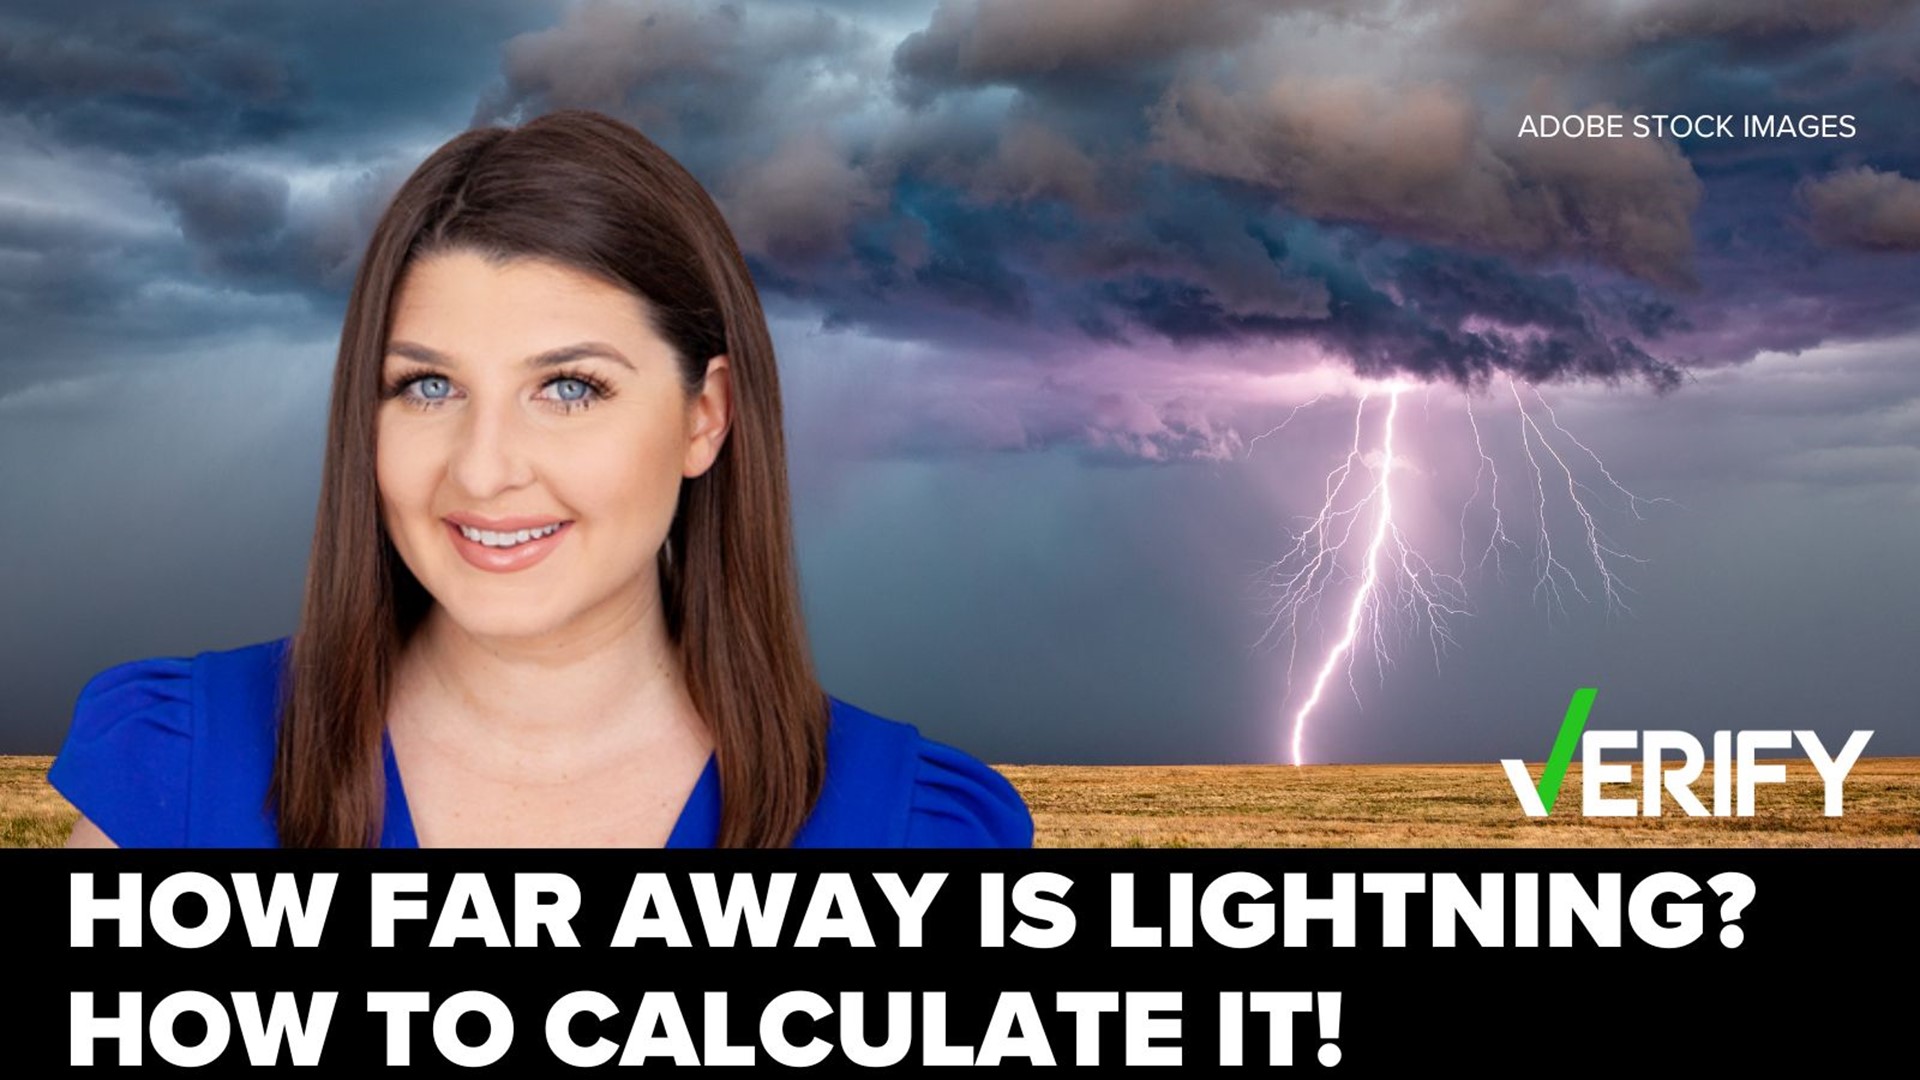 You've likely heard that you can calculate how far away lightning is by counting between the lightning strike and when you hear the thunder. It's actually closer.